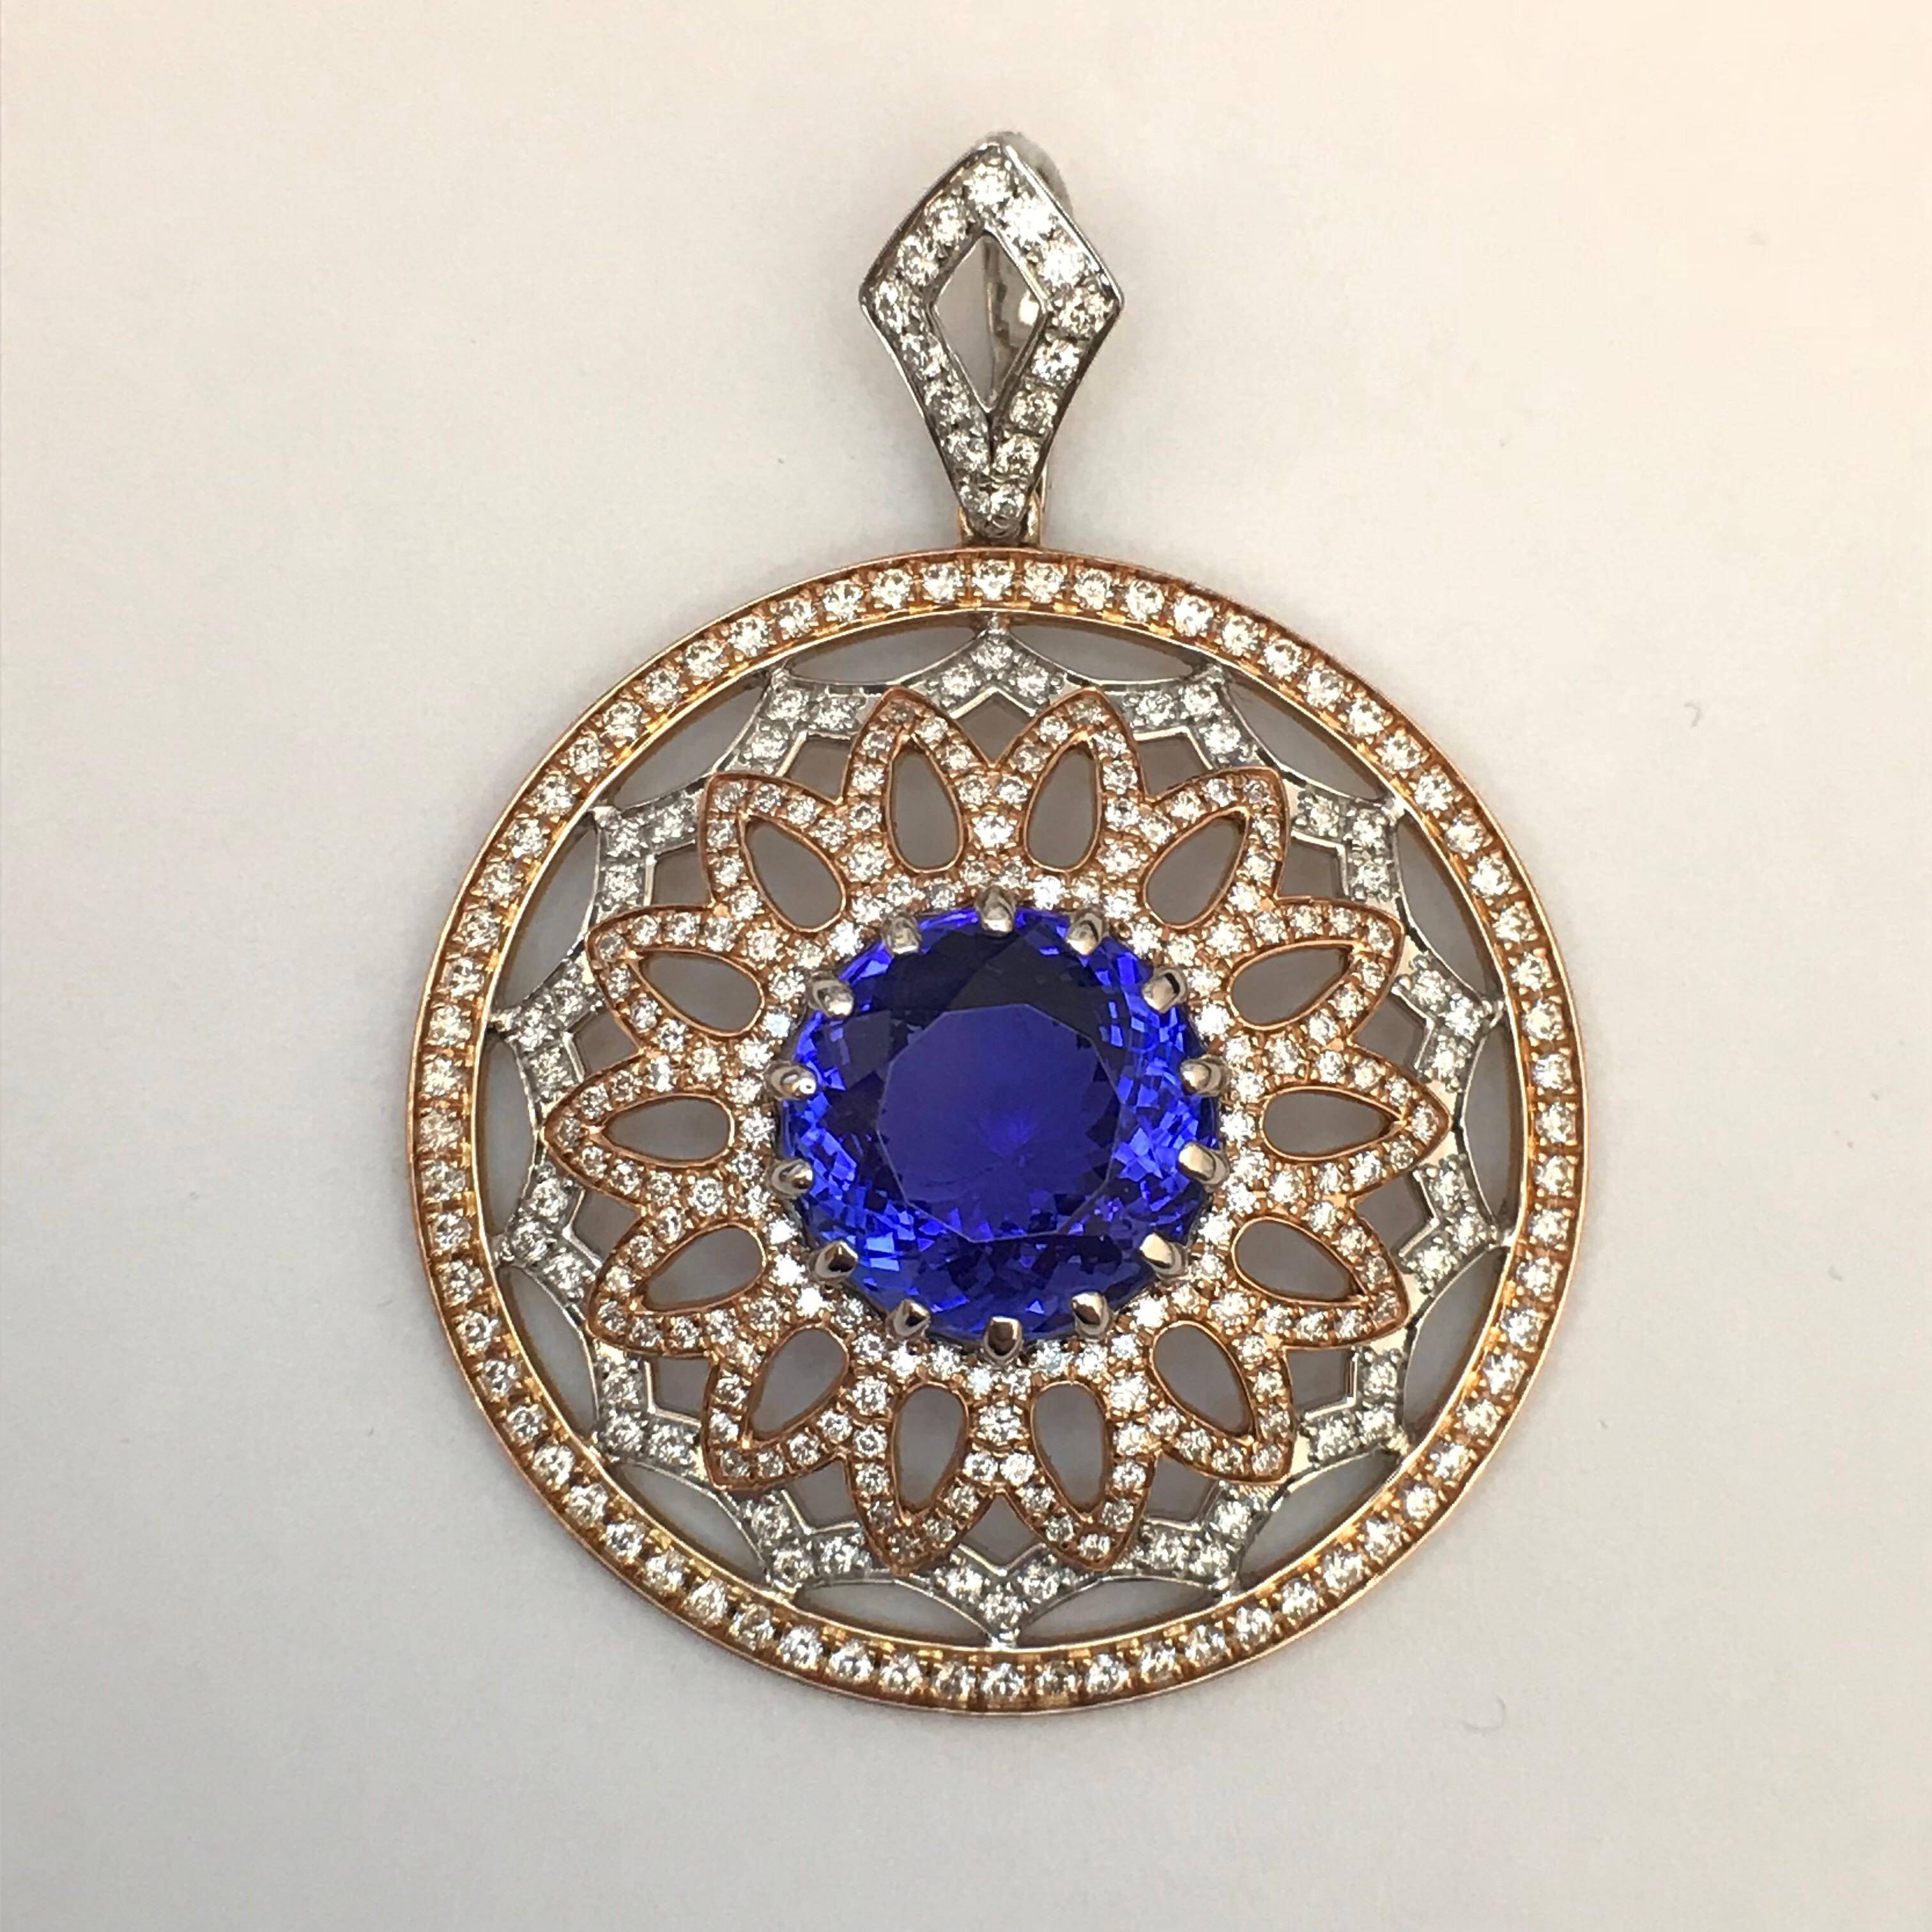 As inspired as the rose window of a cathedral, this pendant centers a tanzanite of an intense blue-purple. It is surrounded by open petals of rose gold that overlay a scalloped edge of white gold, all framed within a circle of rose gold. The white